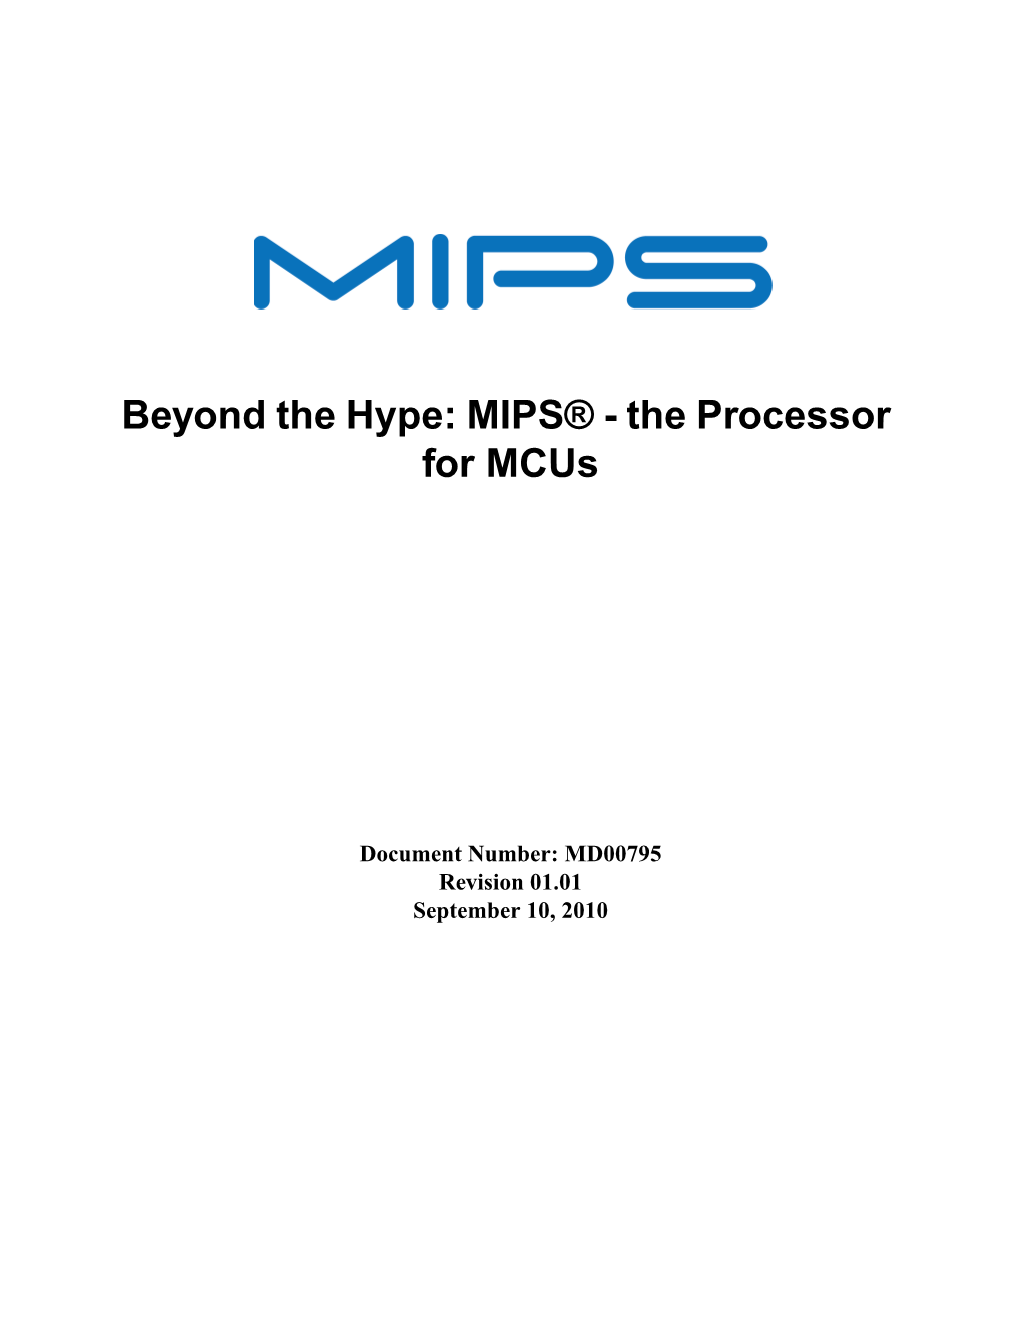 Beyond the Hype: MIPS® - the Processor for Mcus, Revision: 01.01